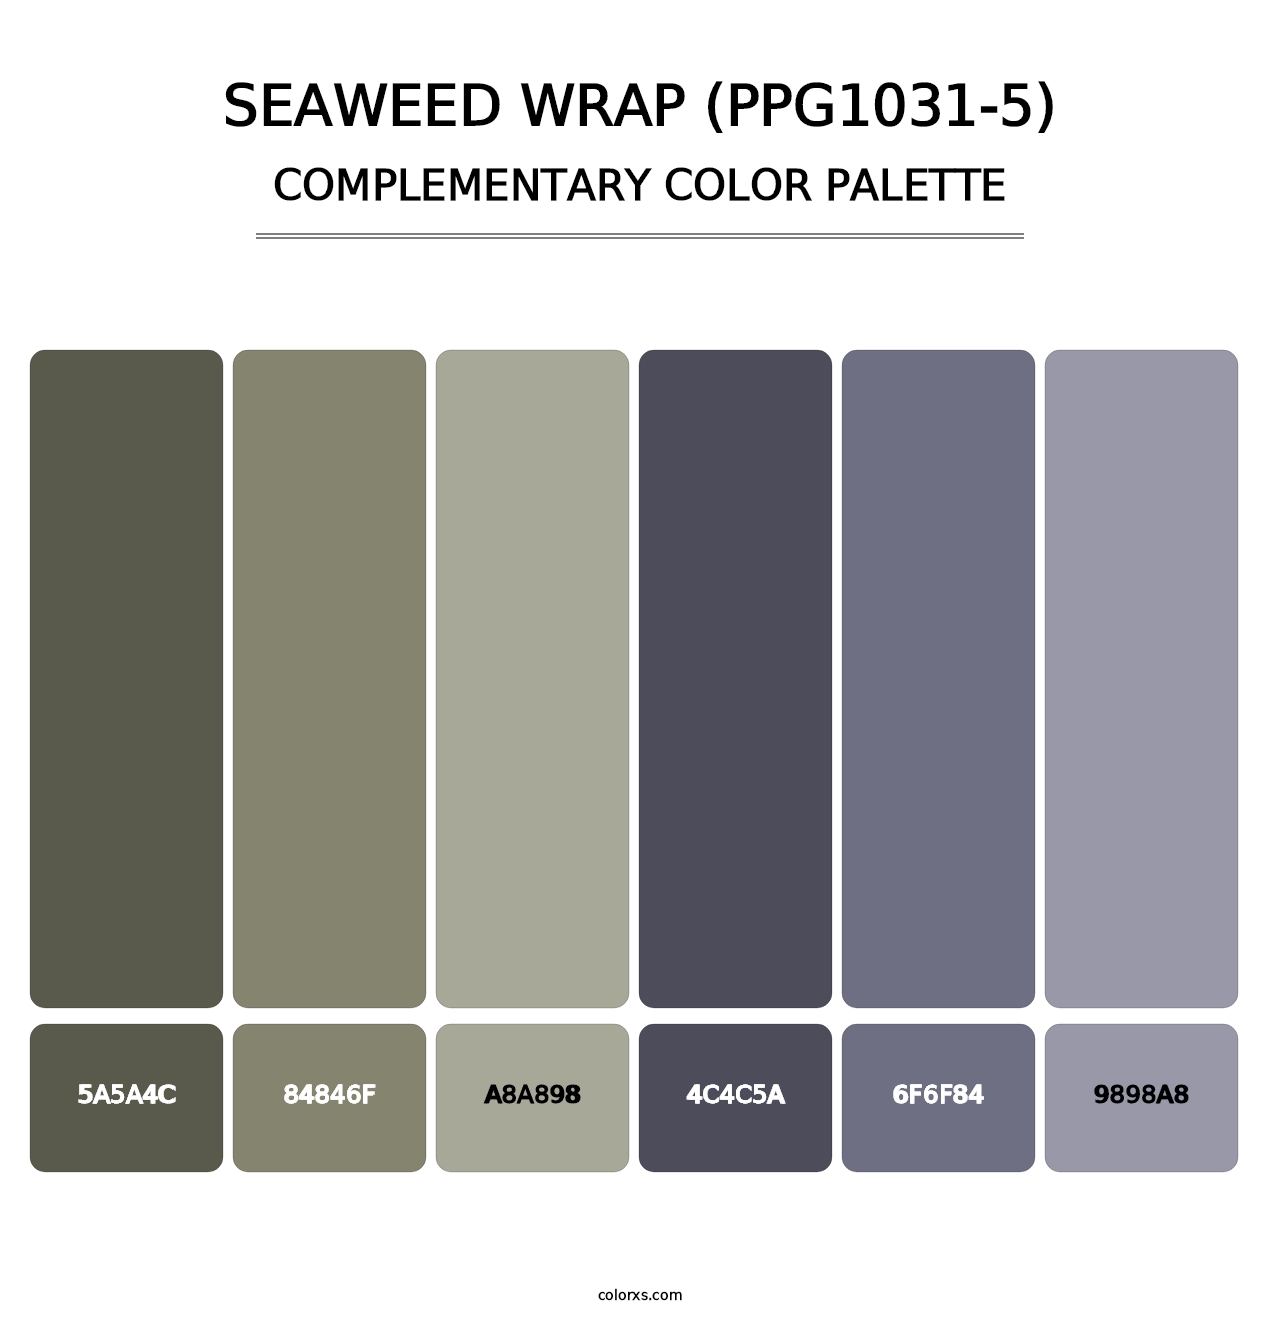 Seaweed Wrap (PPG1031-5) - Complementary Color Palette